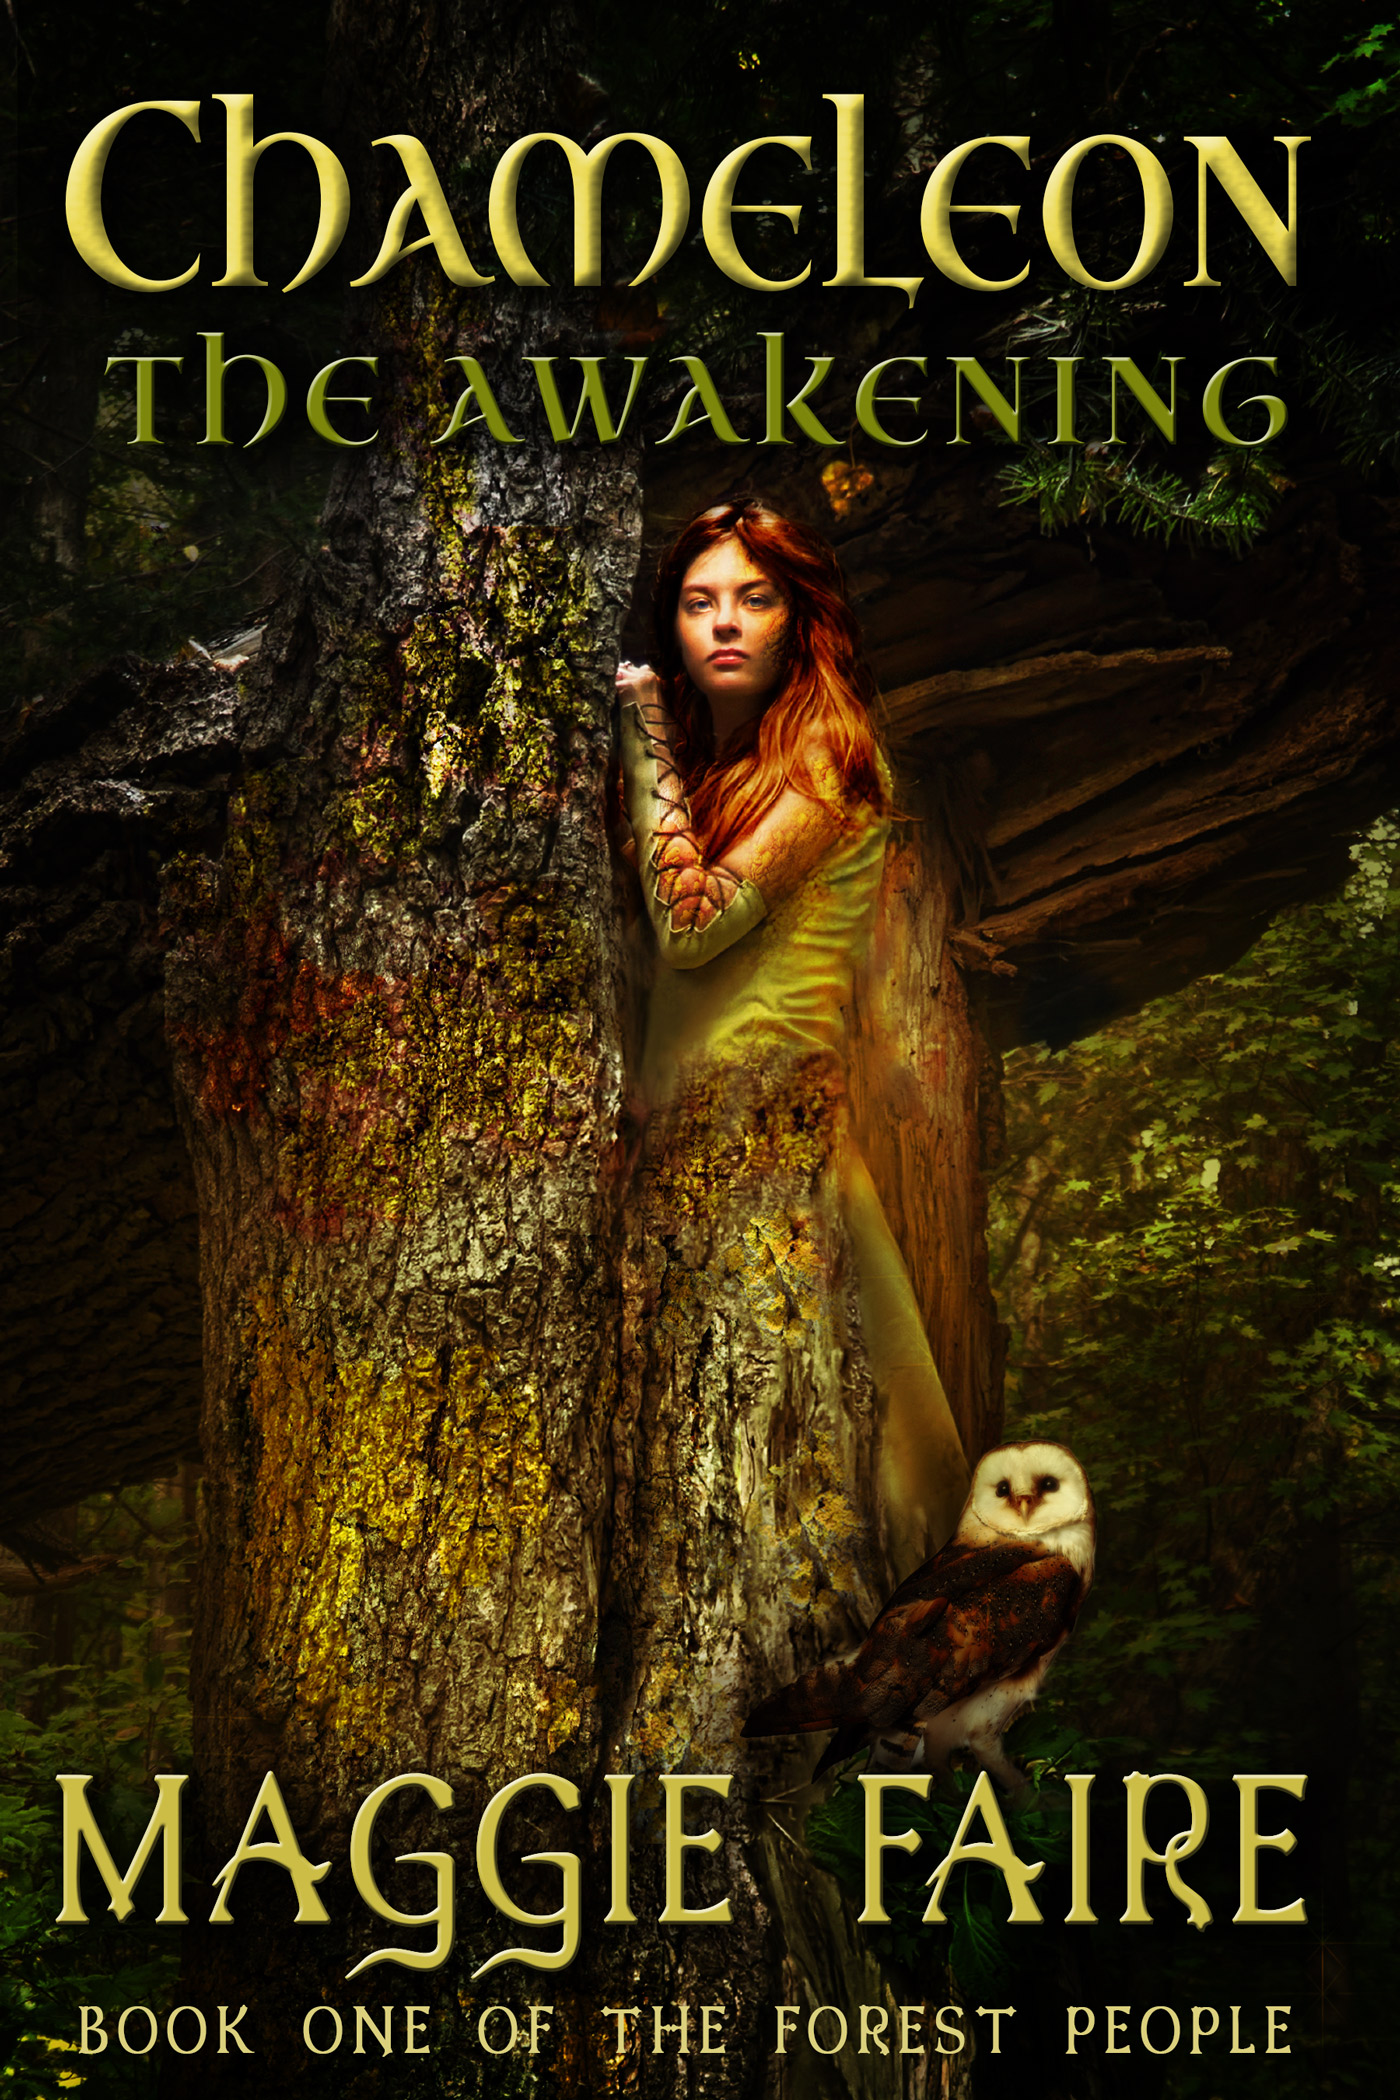 Chameleon: The Awakening (Book 1 of the Forest People)